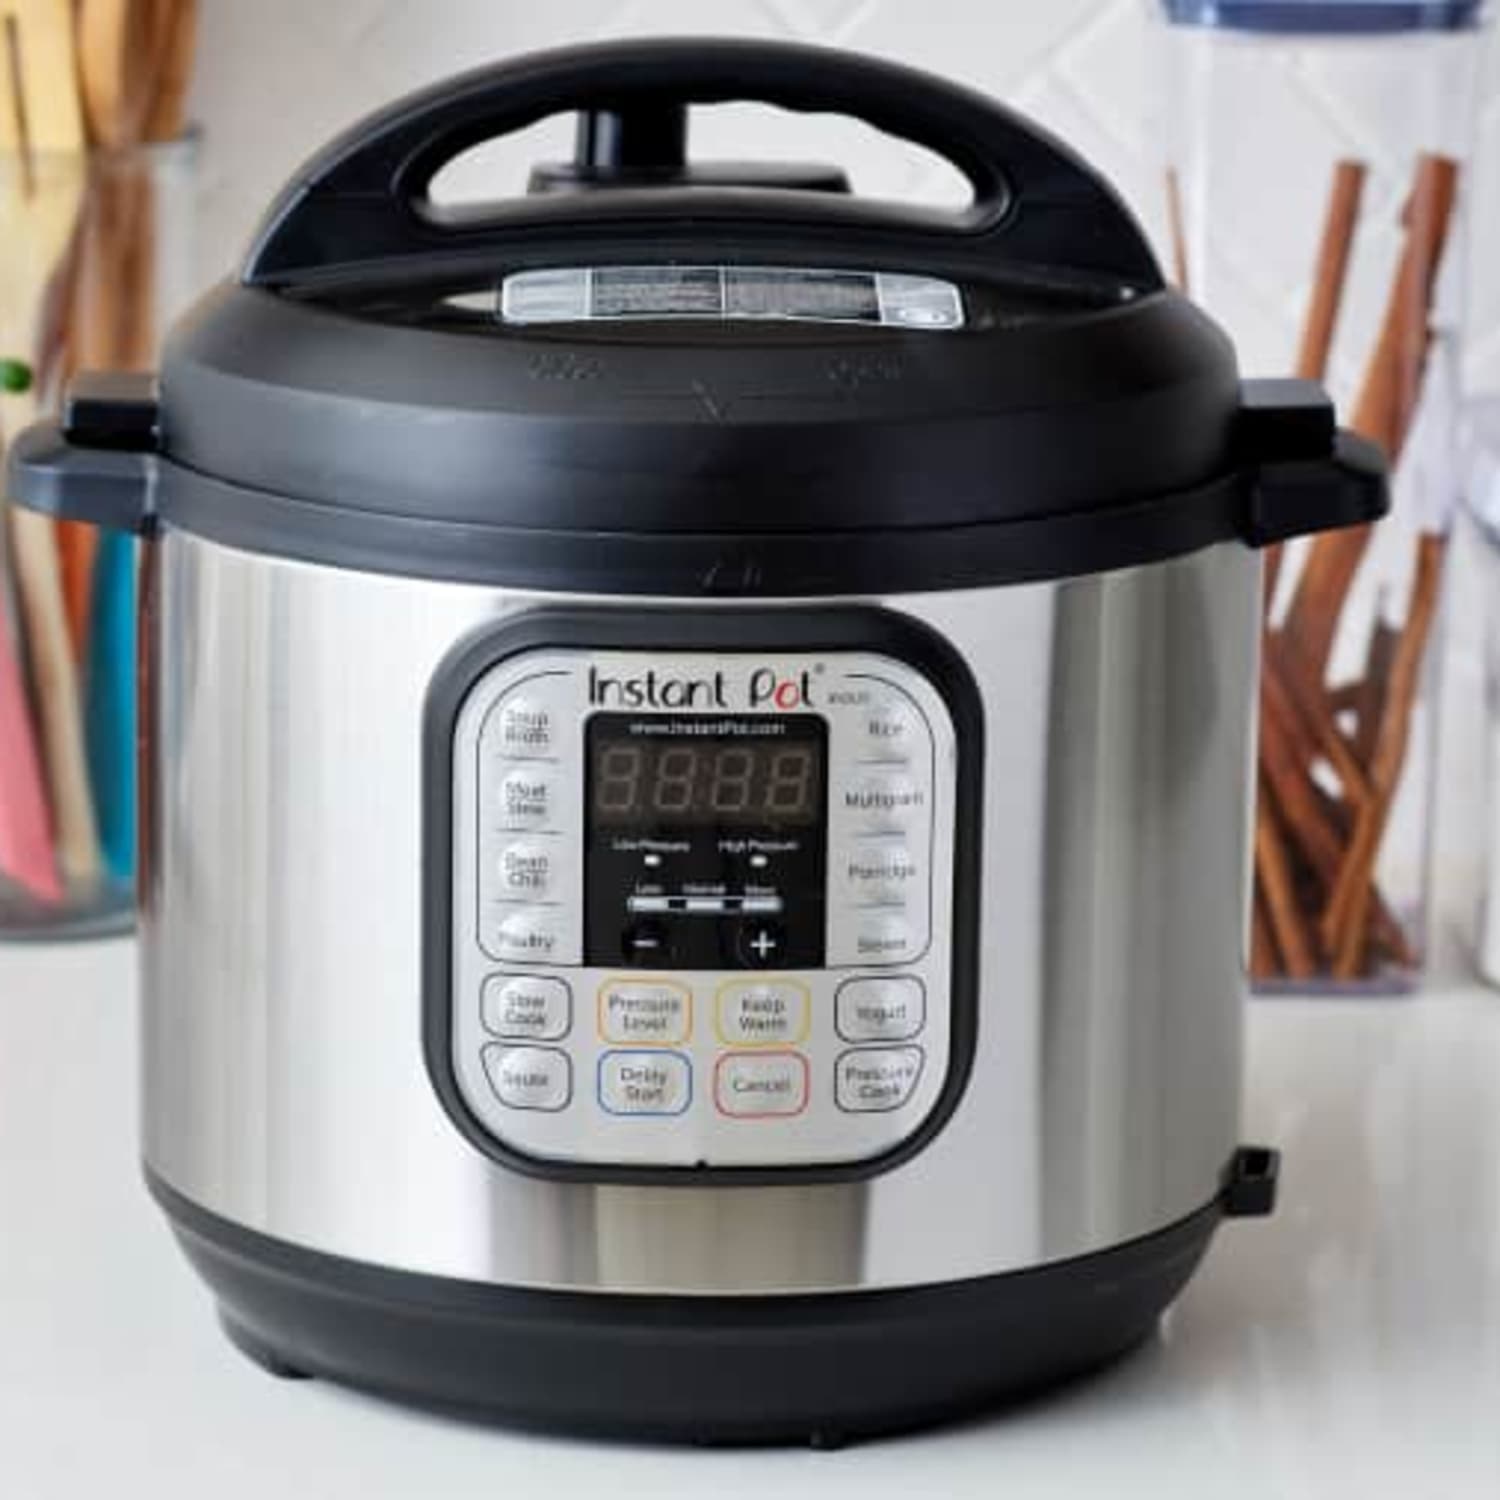 The Most Common Instant Pot Problems and How to Fix Them